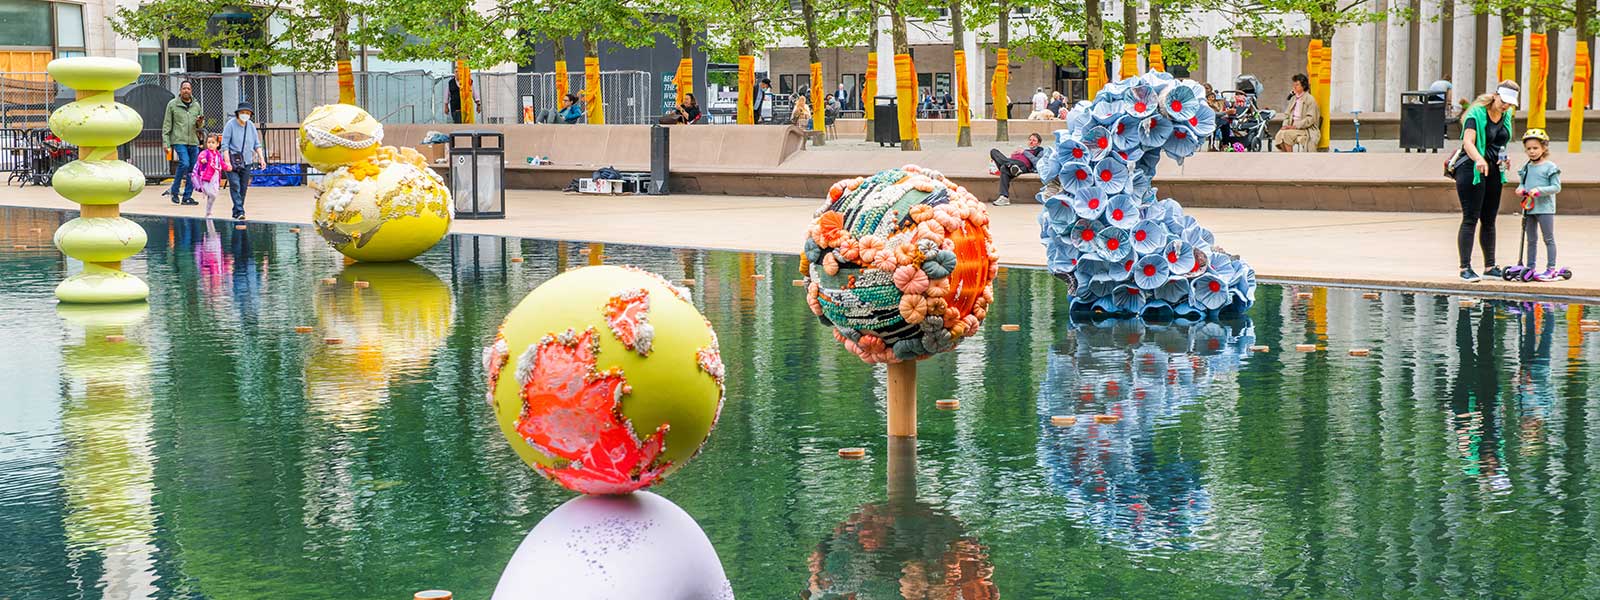 Sculptures at Phingbodhipakkiya's "Islands in the Sea" installation, Hearst Plaza, Lincoln Center. / Photo: Deb Fong